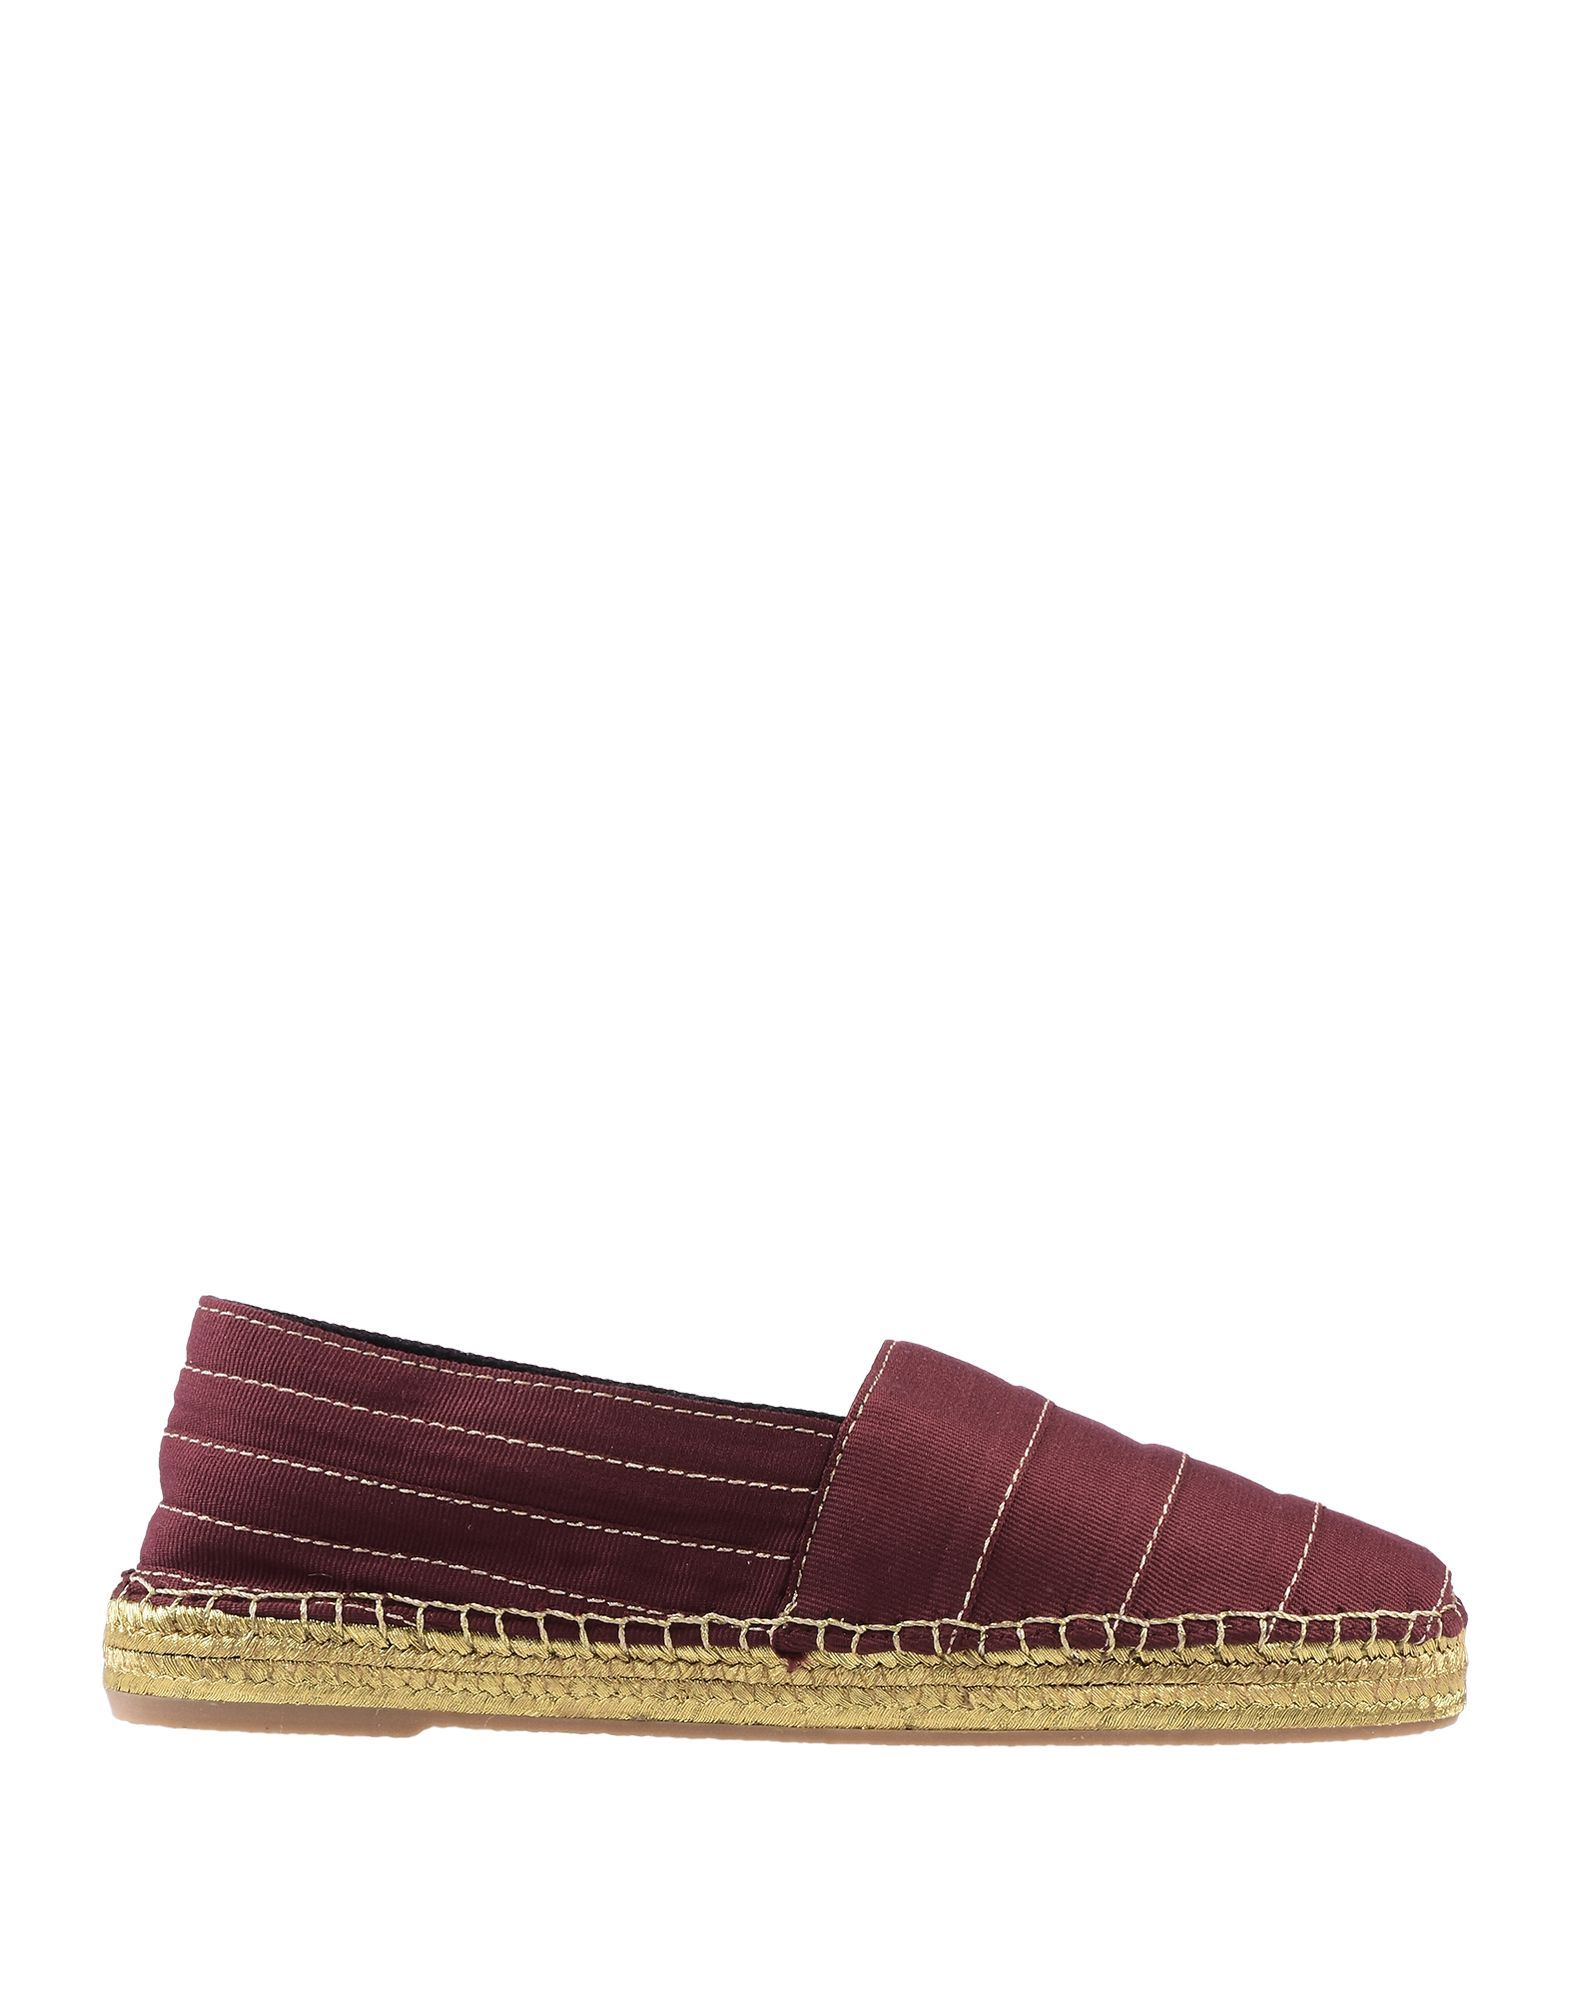 plain weave, embroidered detailing, solid colour, round toeline, flat, leather lining, rubber sole, contains non-textile parts of animal origin, large sized